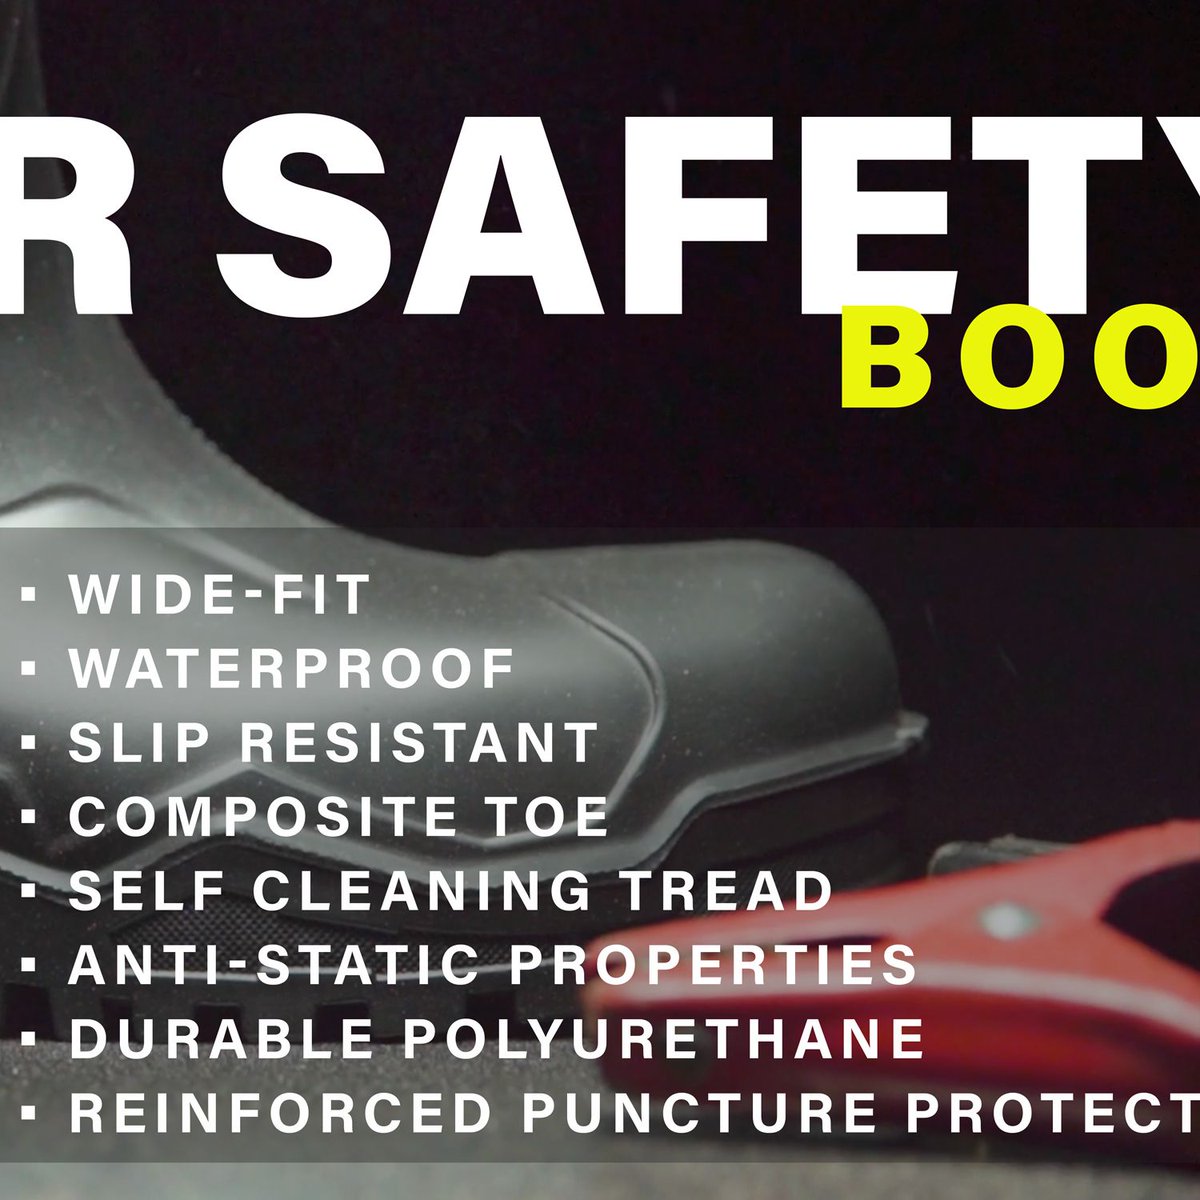 • Composite Toe
• One-Piece Construction
• Durable Polyurethane Material
• Wide-Fit
• Self Cleaning Tread
• Slip Resistant
• Waterproof
• Reinforced Puncture Protection
• Anti-Static Properties